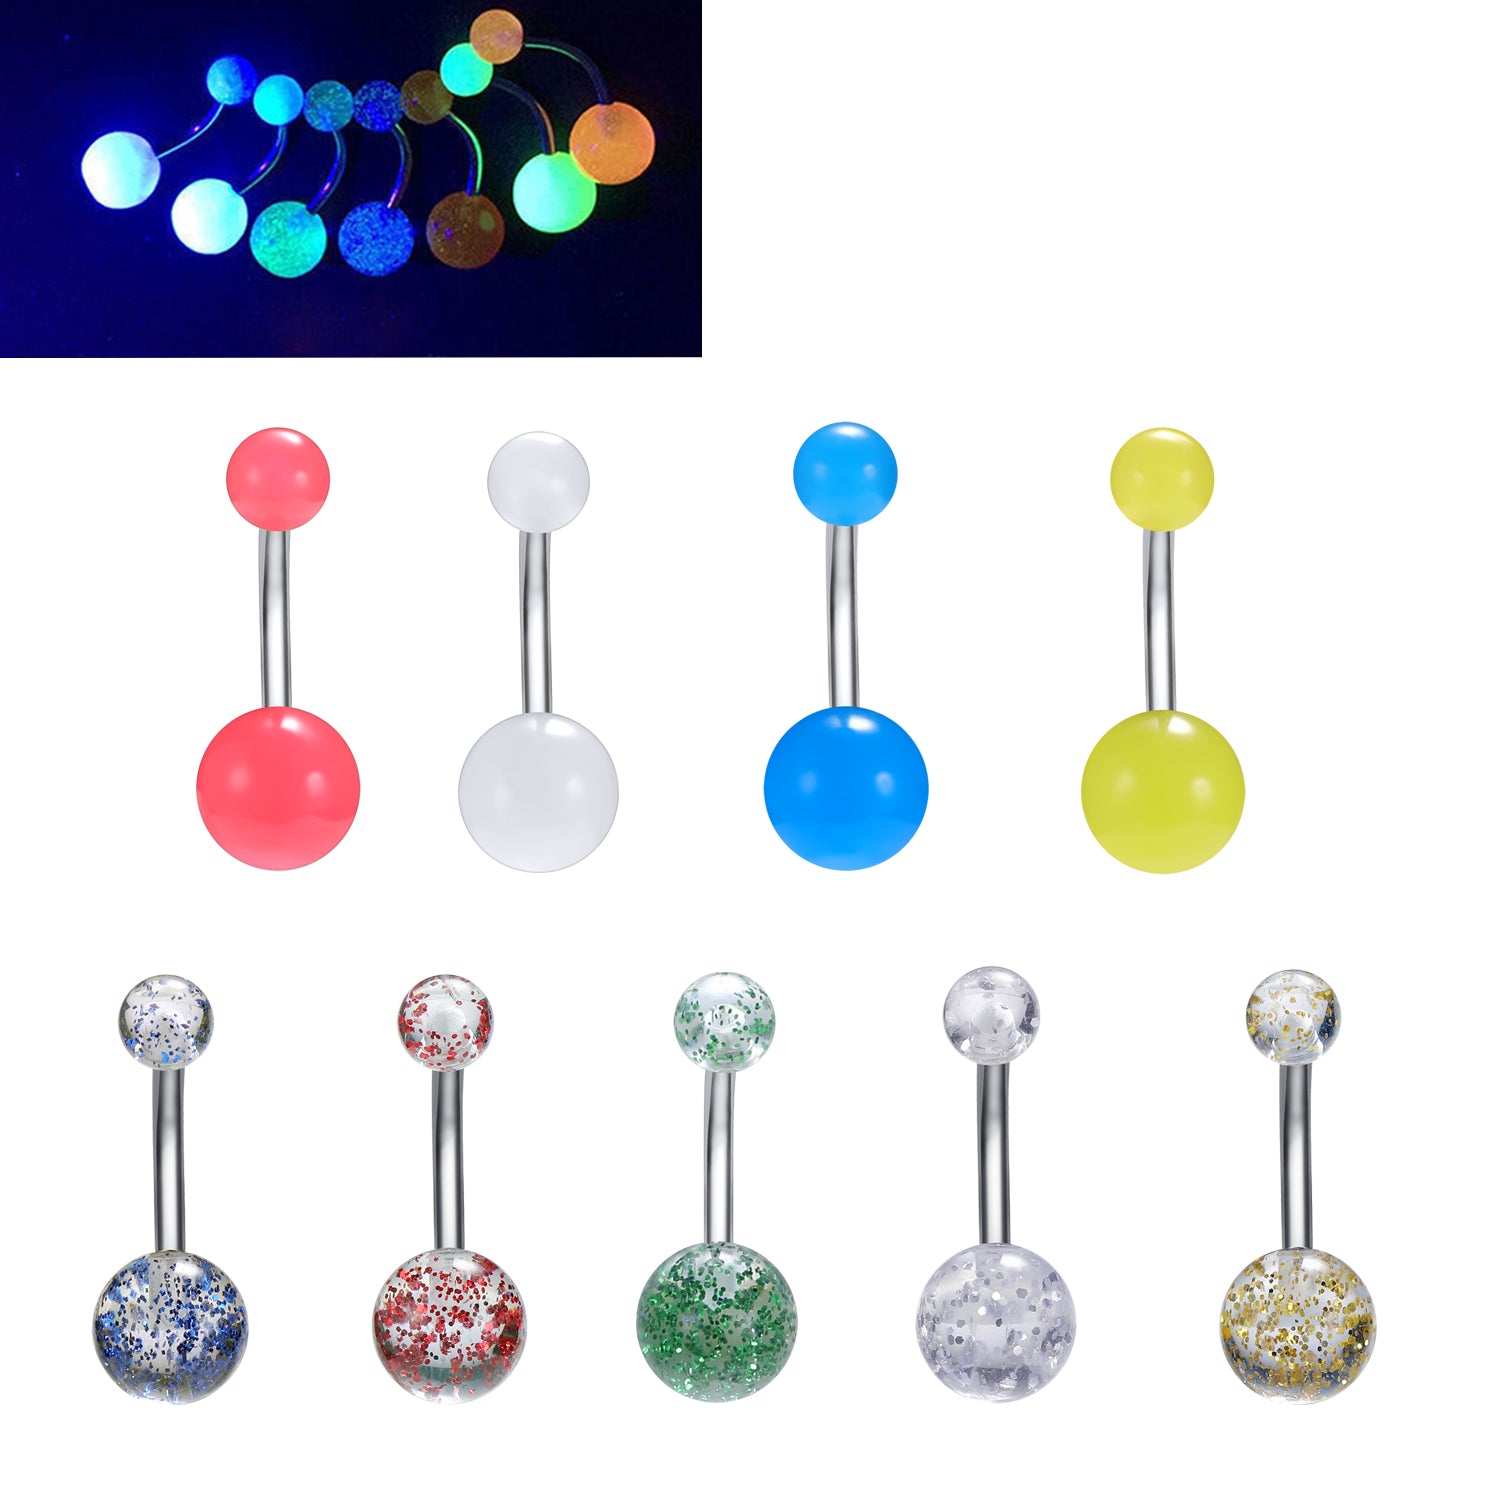 glowing-luminous-14g-belly-button-rings-double-ball-belly-navel-piercing-jewelry